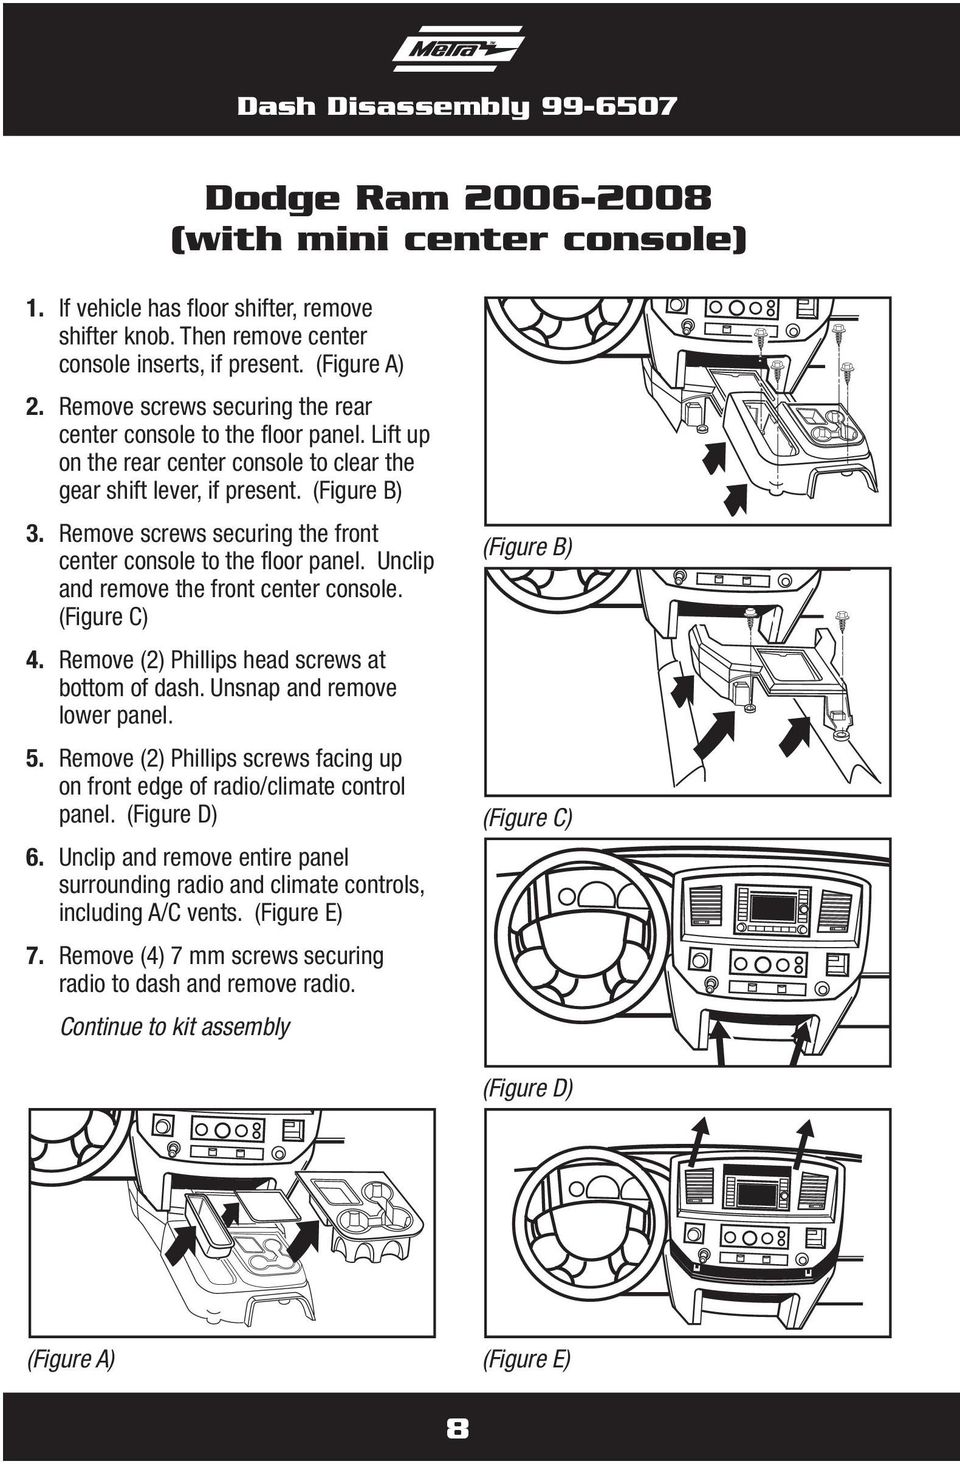 Remove screws securing the front center console to the floor panel. Unclip and remove the front center console. (Figure C) 4. Remove (2) Phillips head screws at bottom of dash.